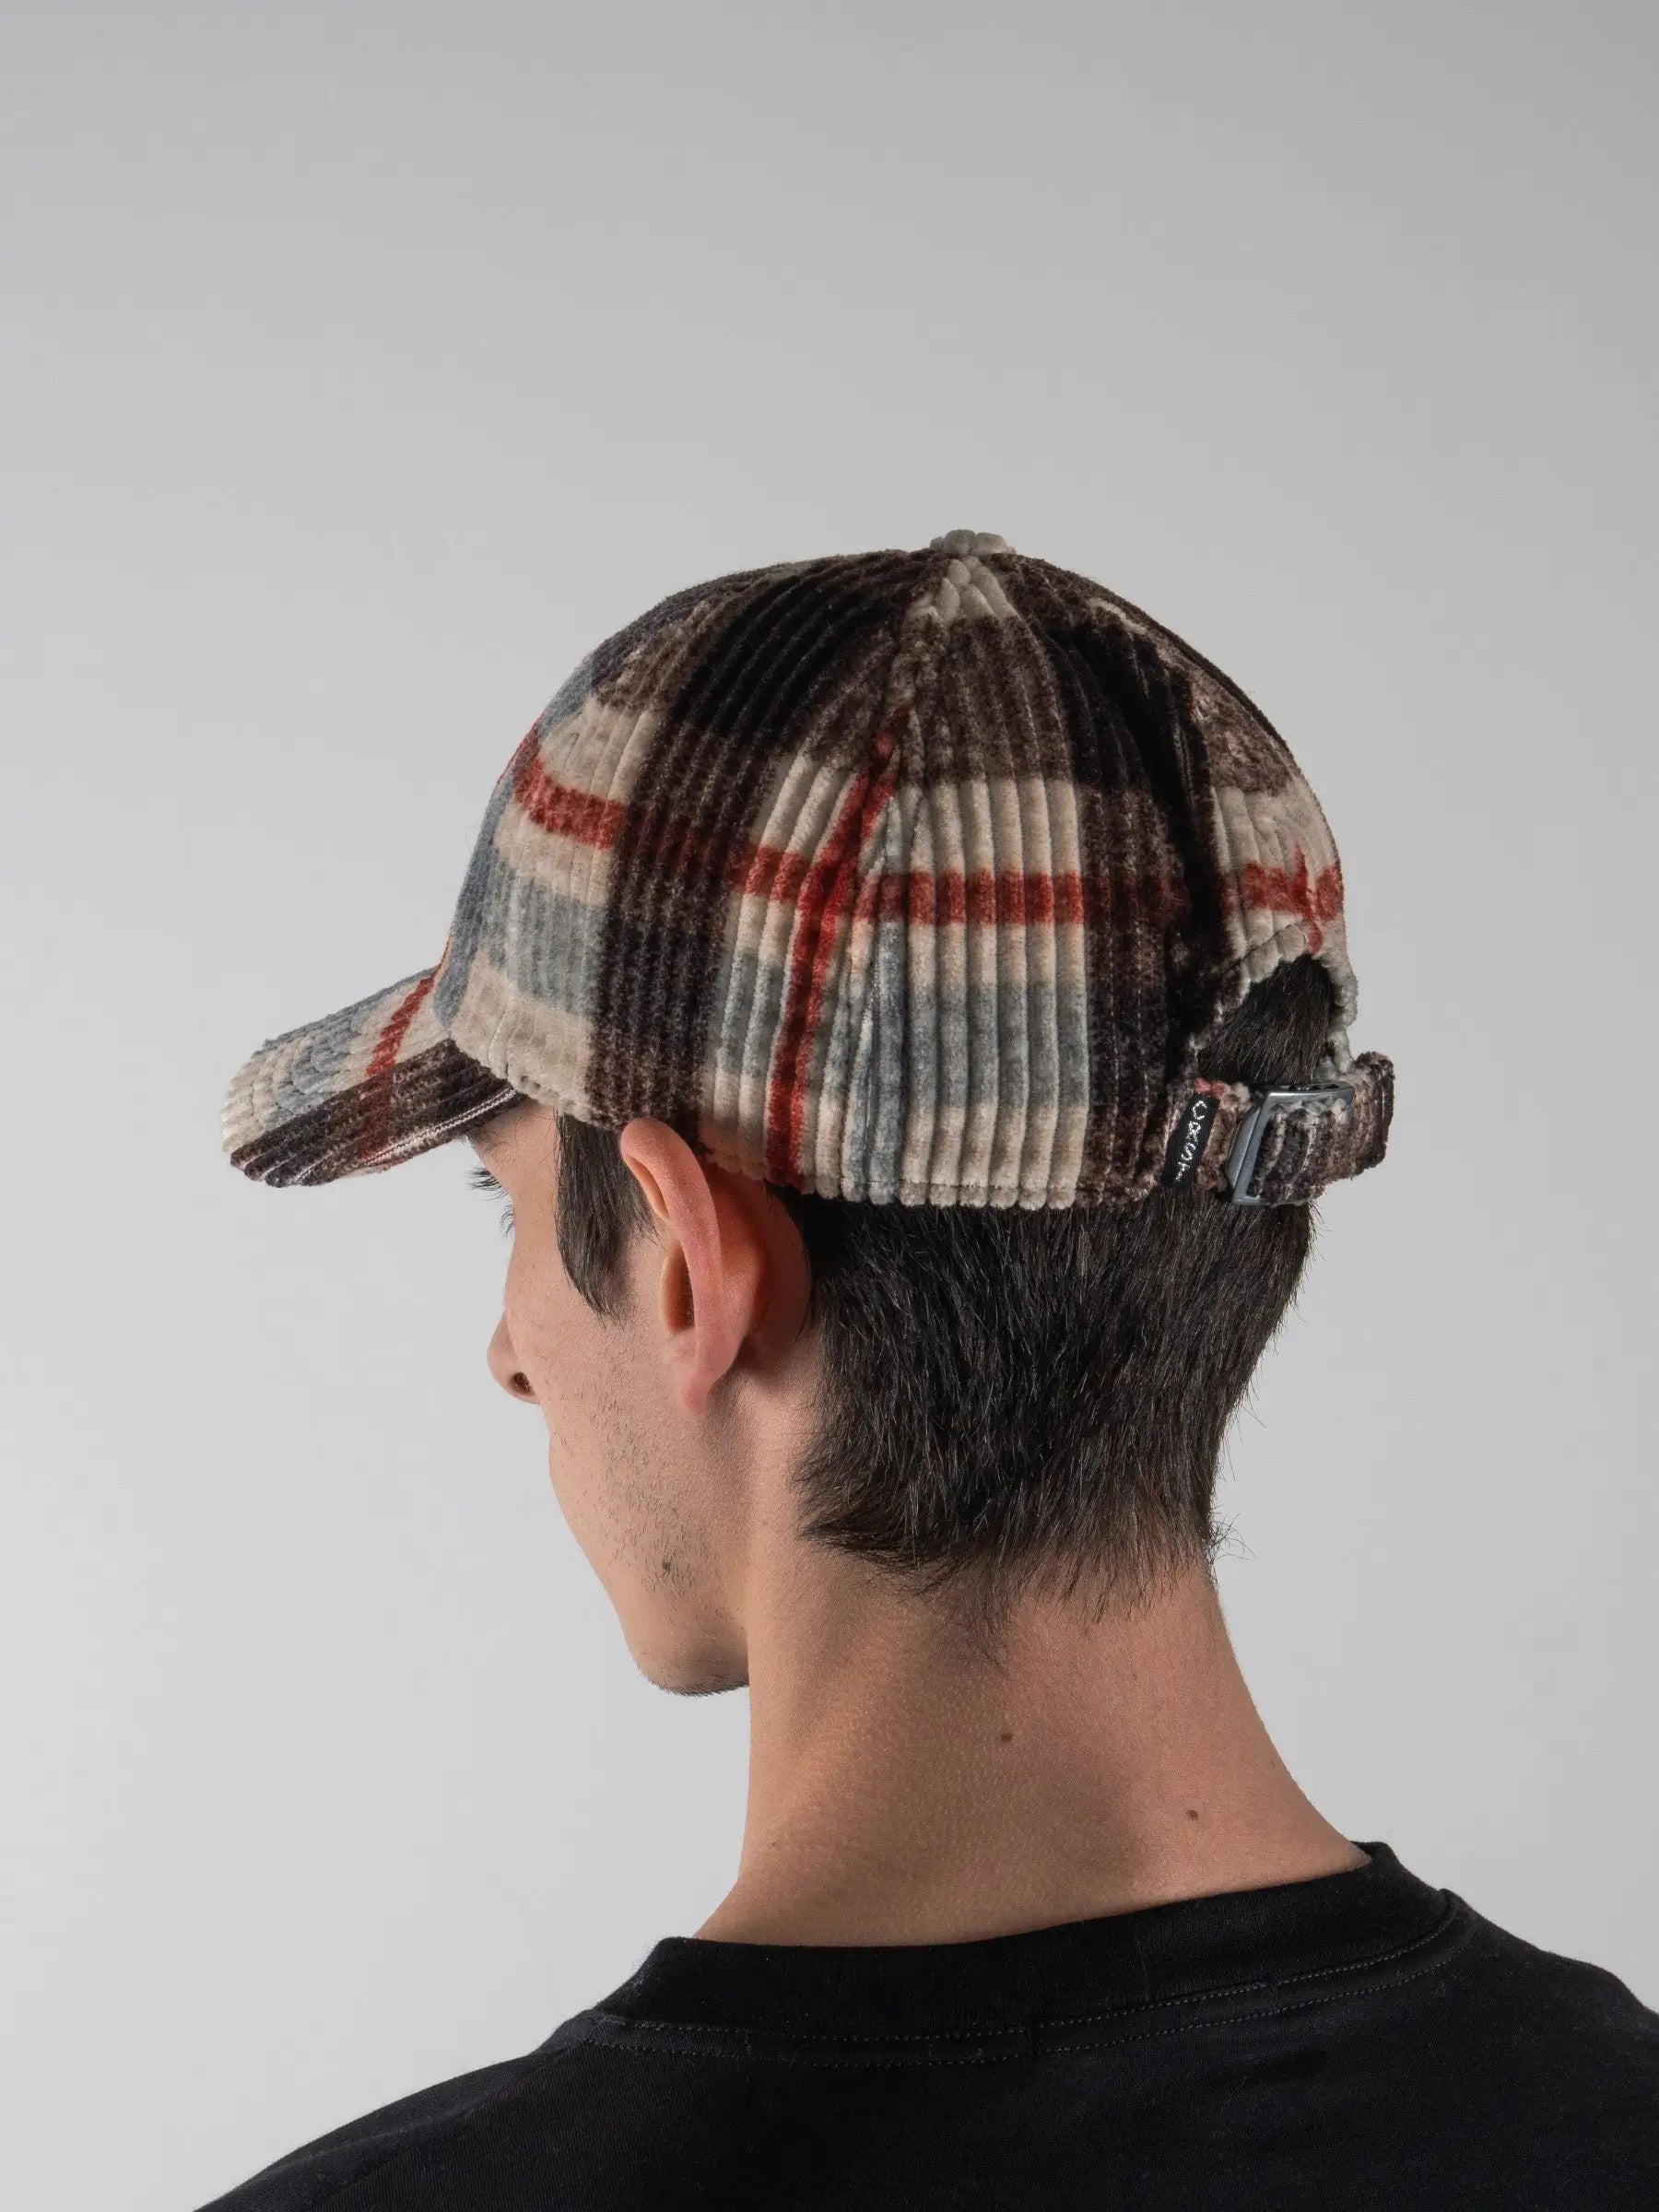 Crest Plaid Corduroy Baseball Cap in Multicolored Plaid - Adjustable for perfect fit